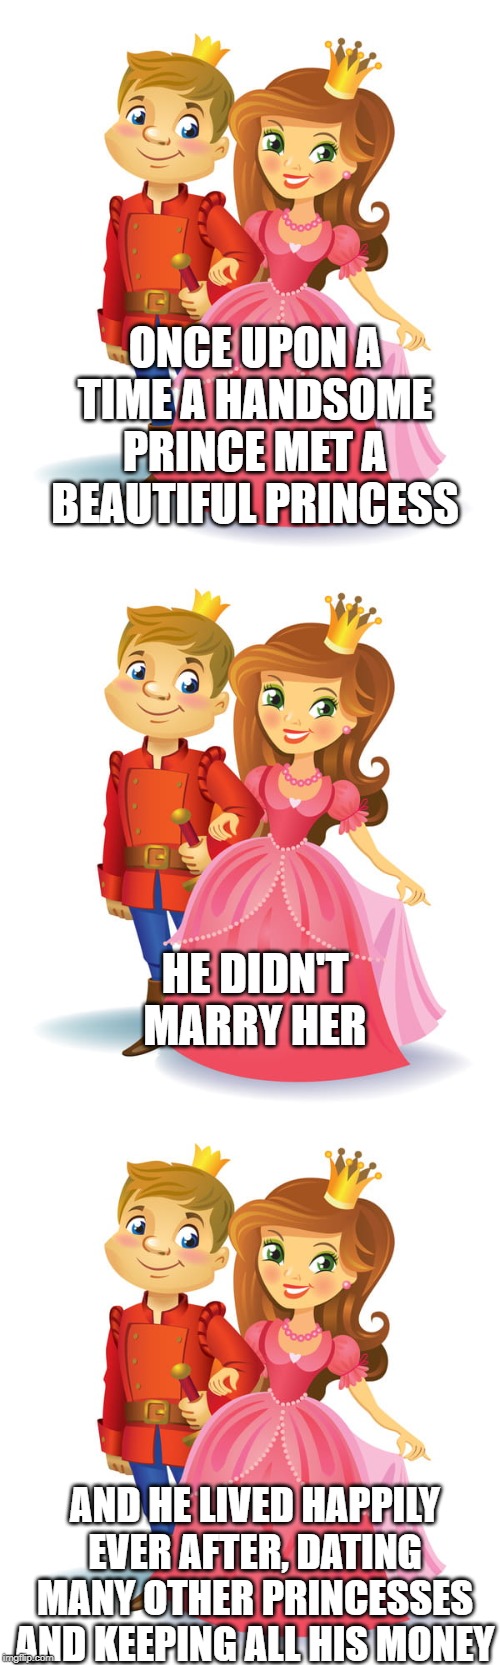 ONCE UPON A TIME A HANDSOME PRINCE MET A BEAUTIFUL PRINCESS; HE DIDN'T MARRY HER; AND HE LIVED HAPPILY EVER AFTER, DATING MANY OTHER PRINCESSES AND KEEPING ALL HIS MONEY | image tagged in marriage | made w/ Imgflip meme maker